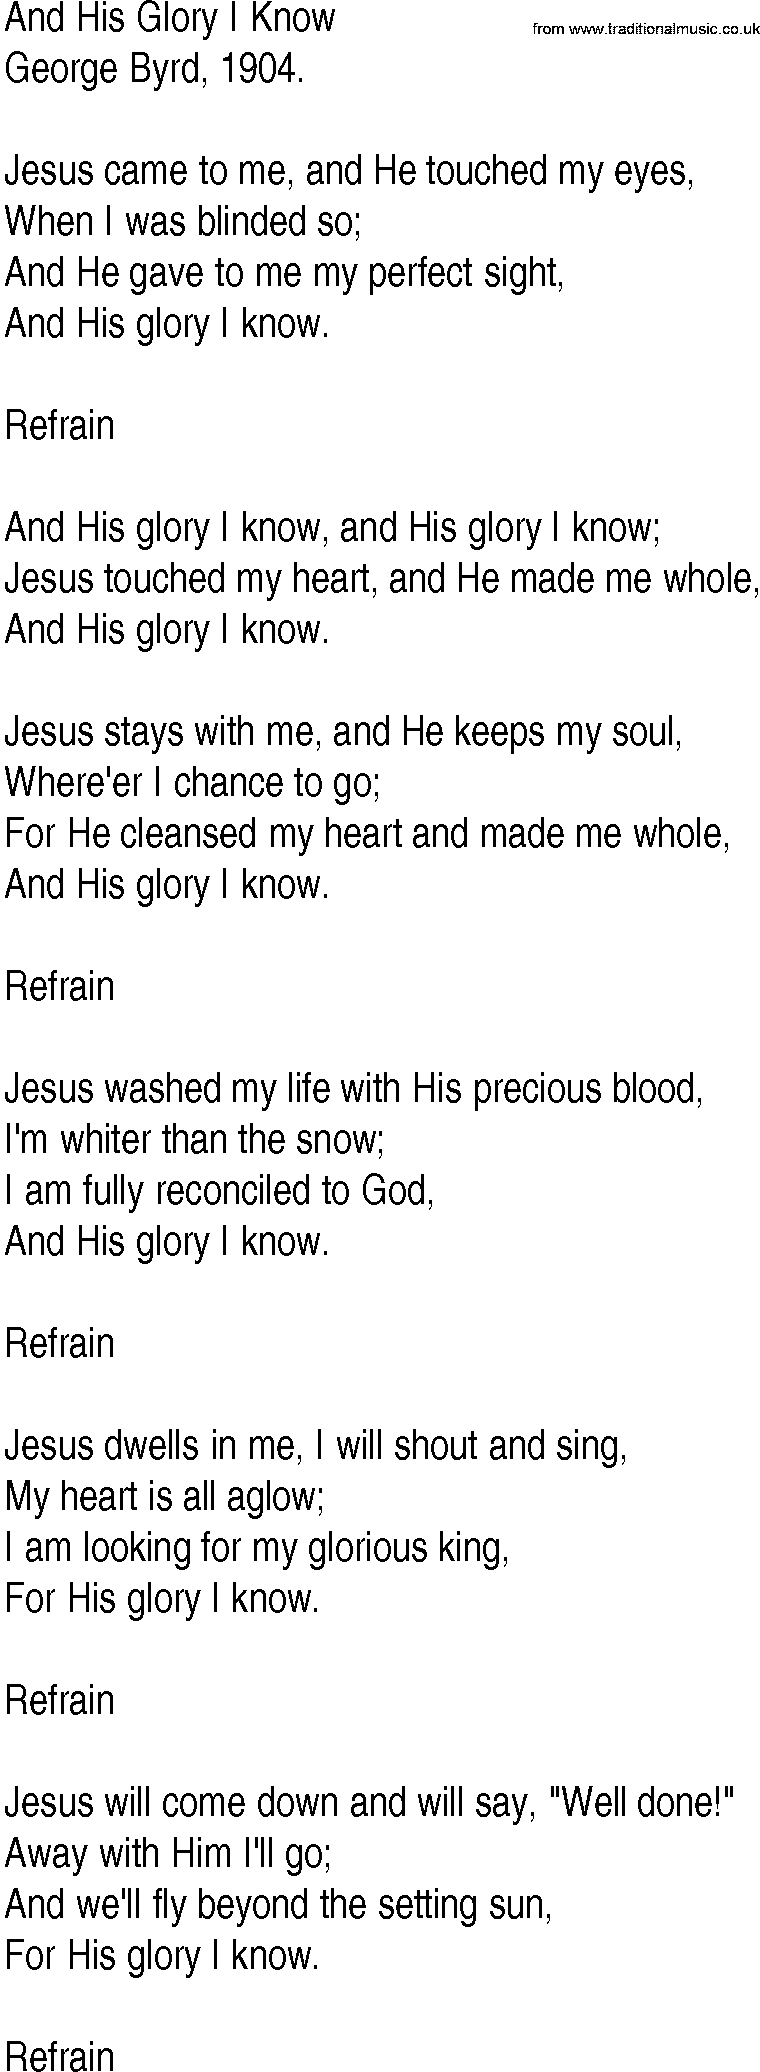 Hymn and Gospel Song: And His Glory I Know by George Byrd lyrics